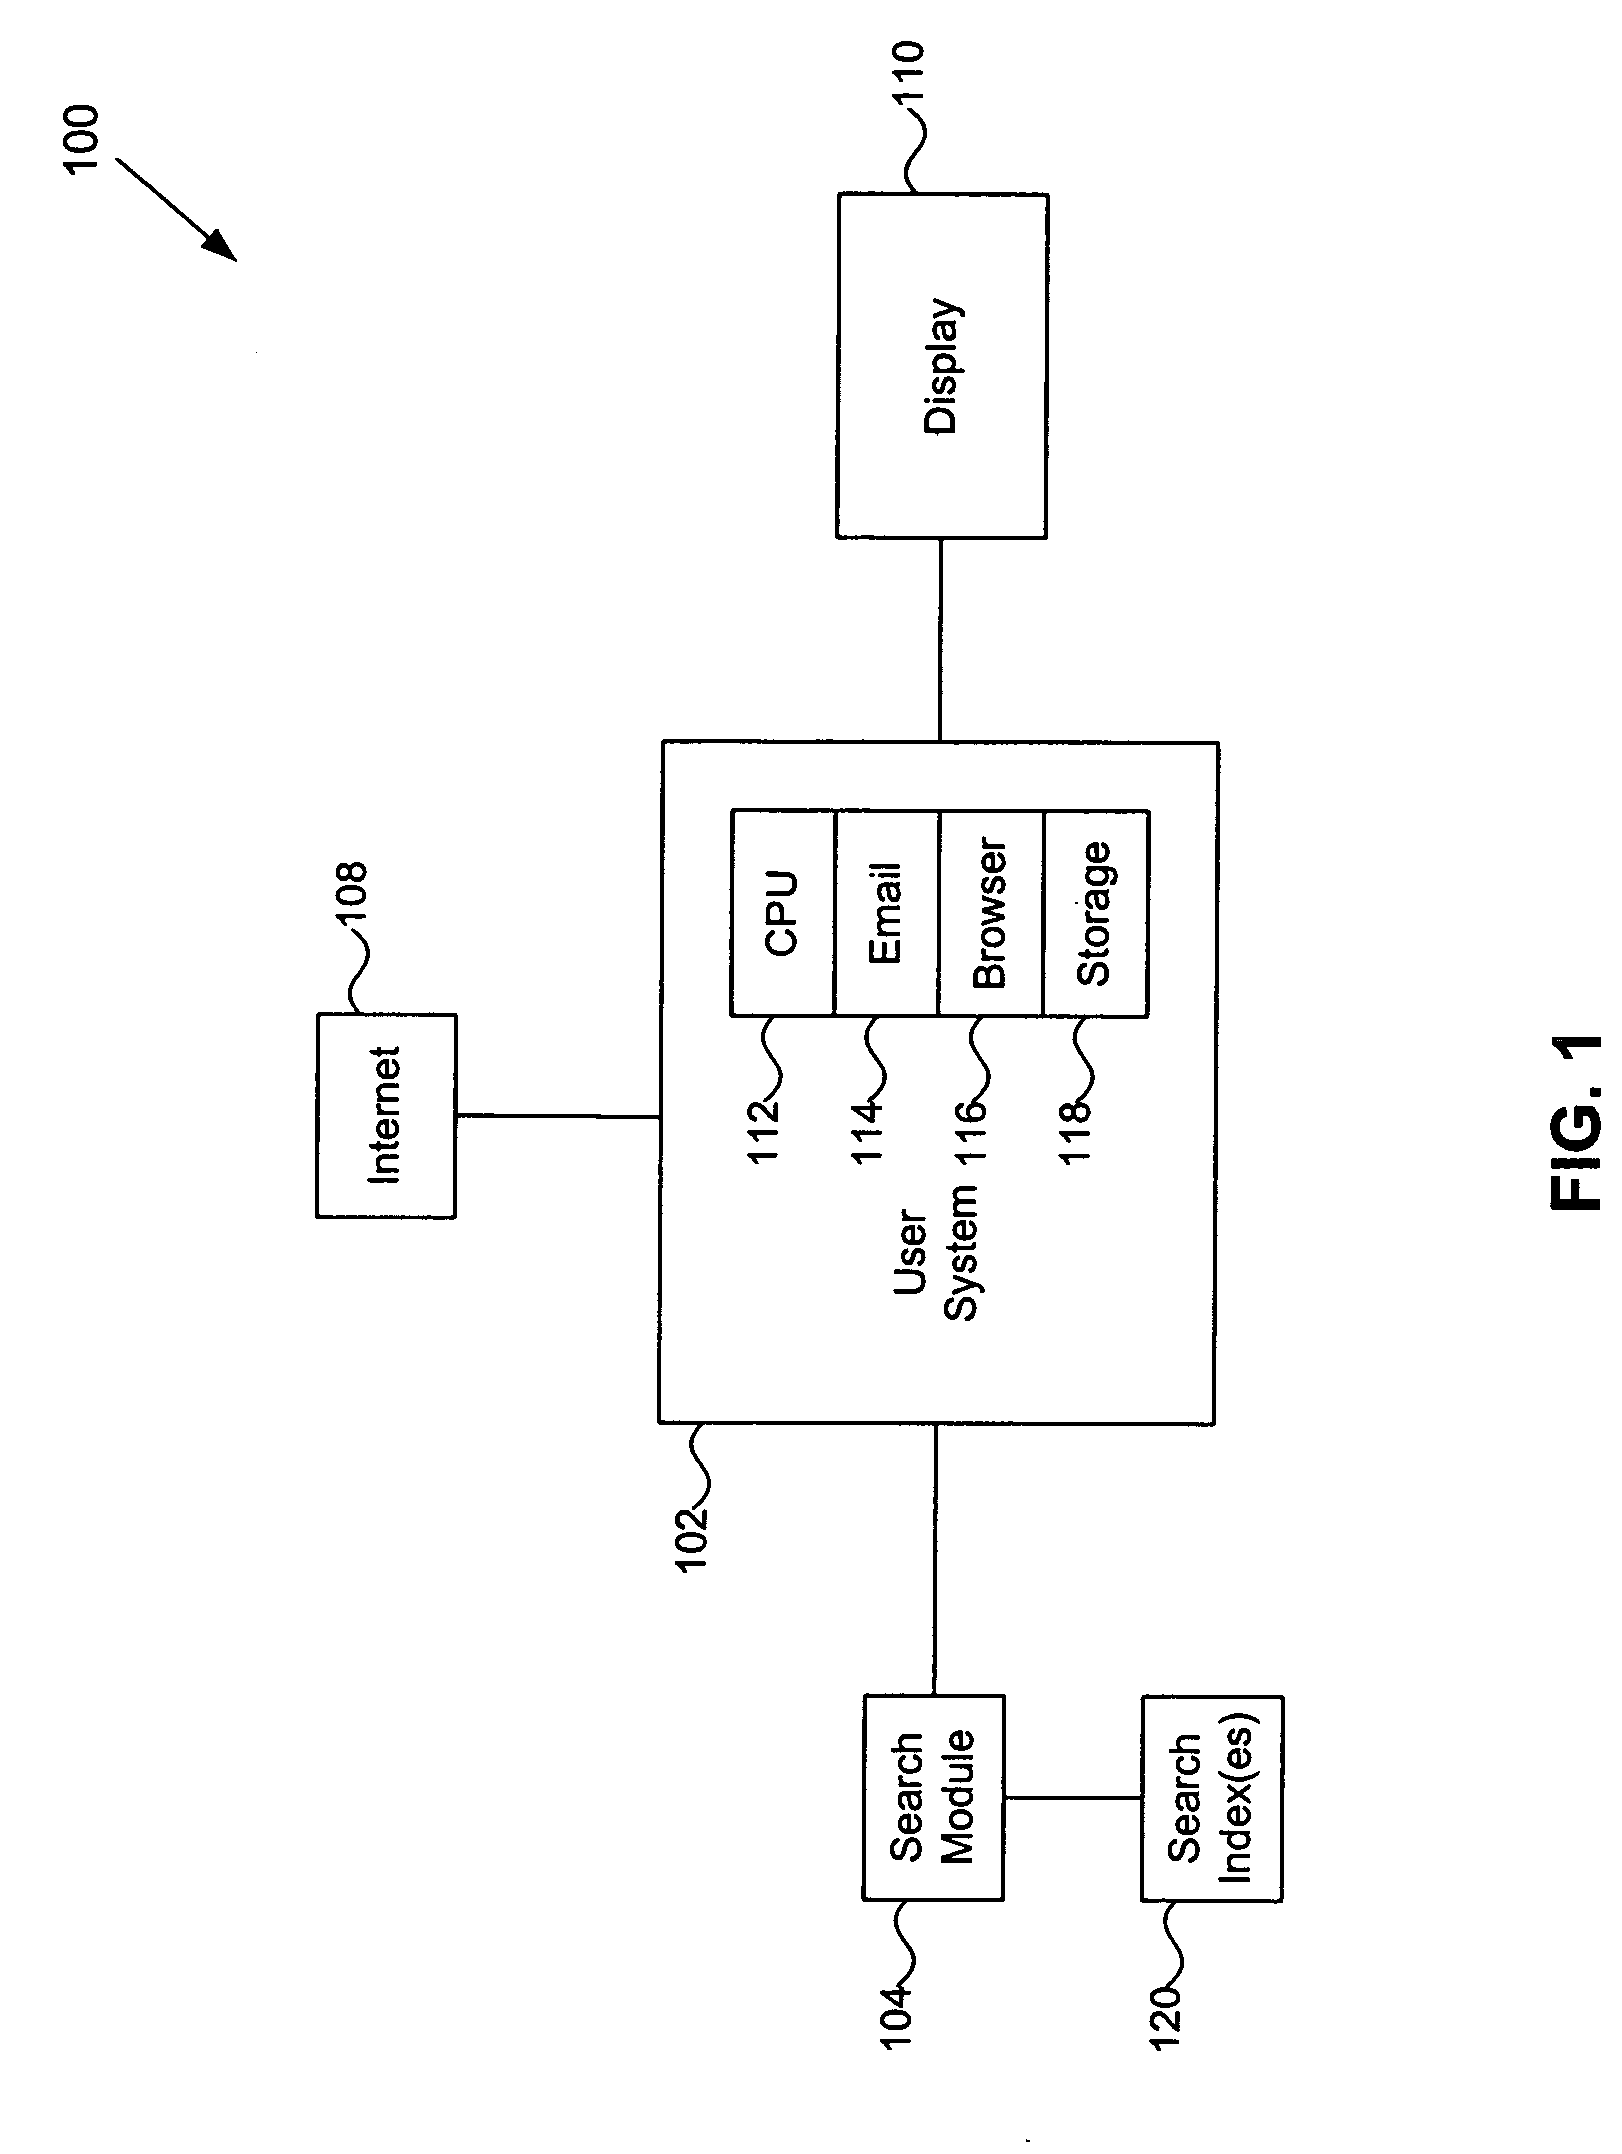 Method, apparatus, and computer program product for indexing, synchronizing and searching digital data